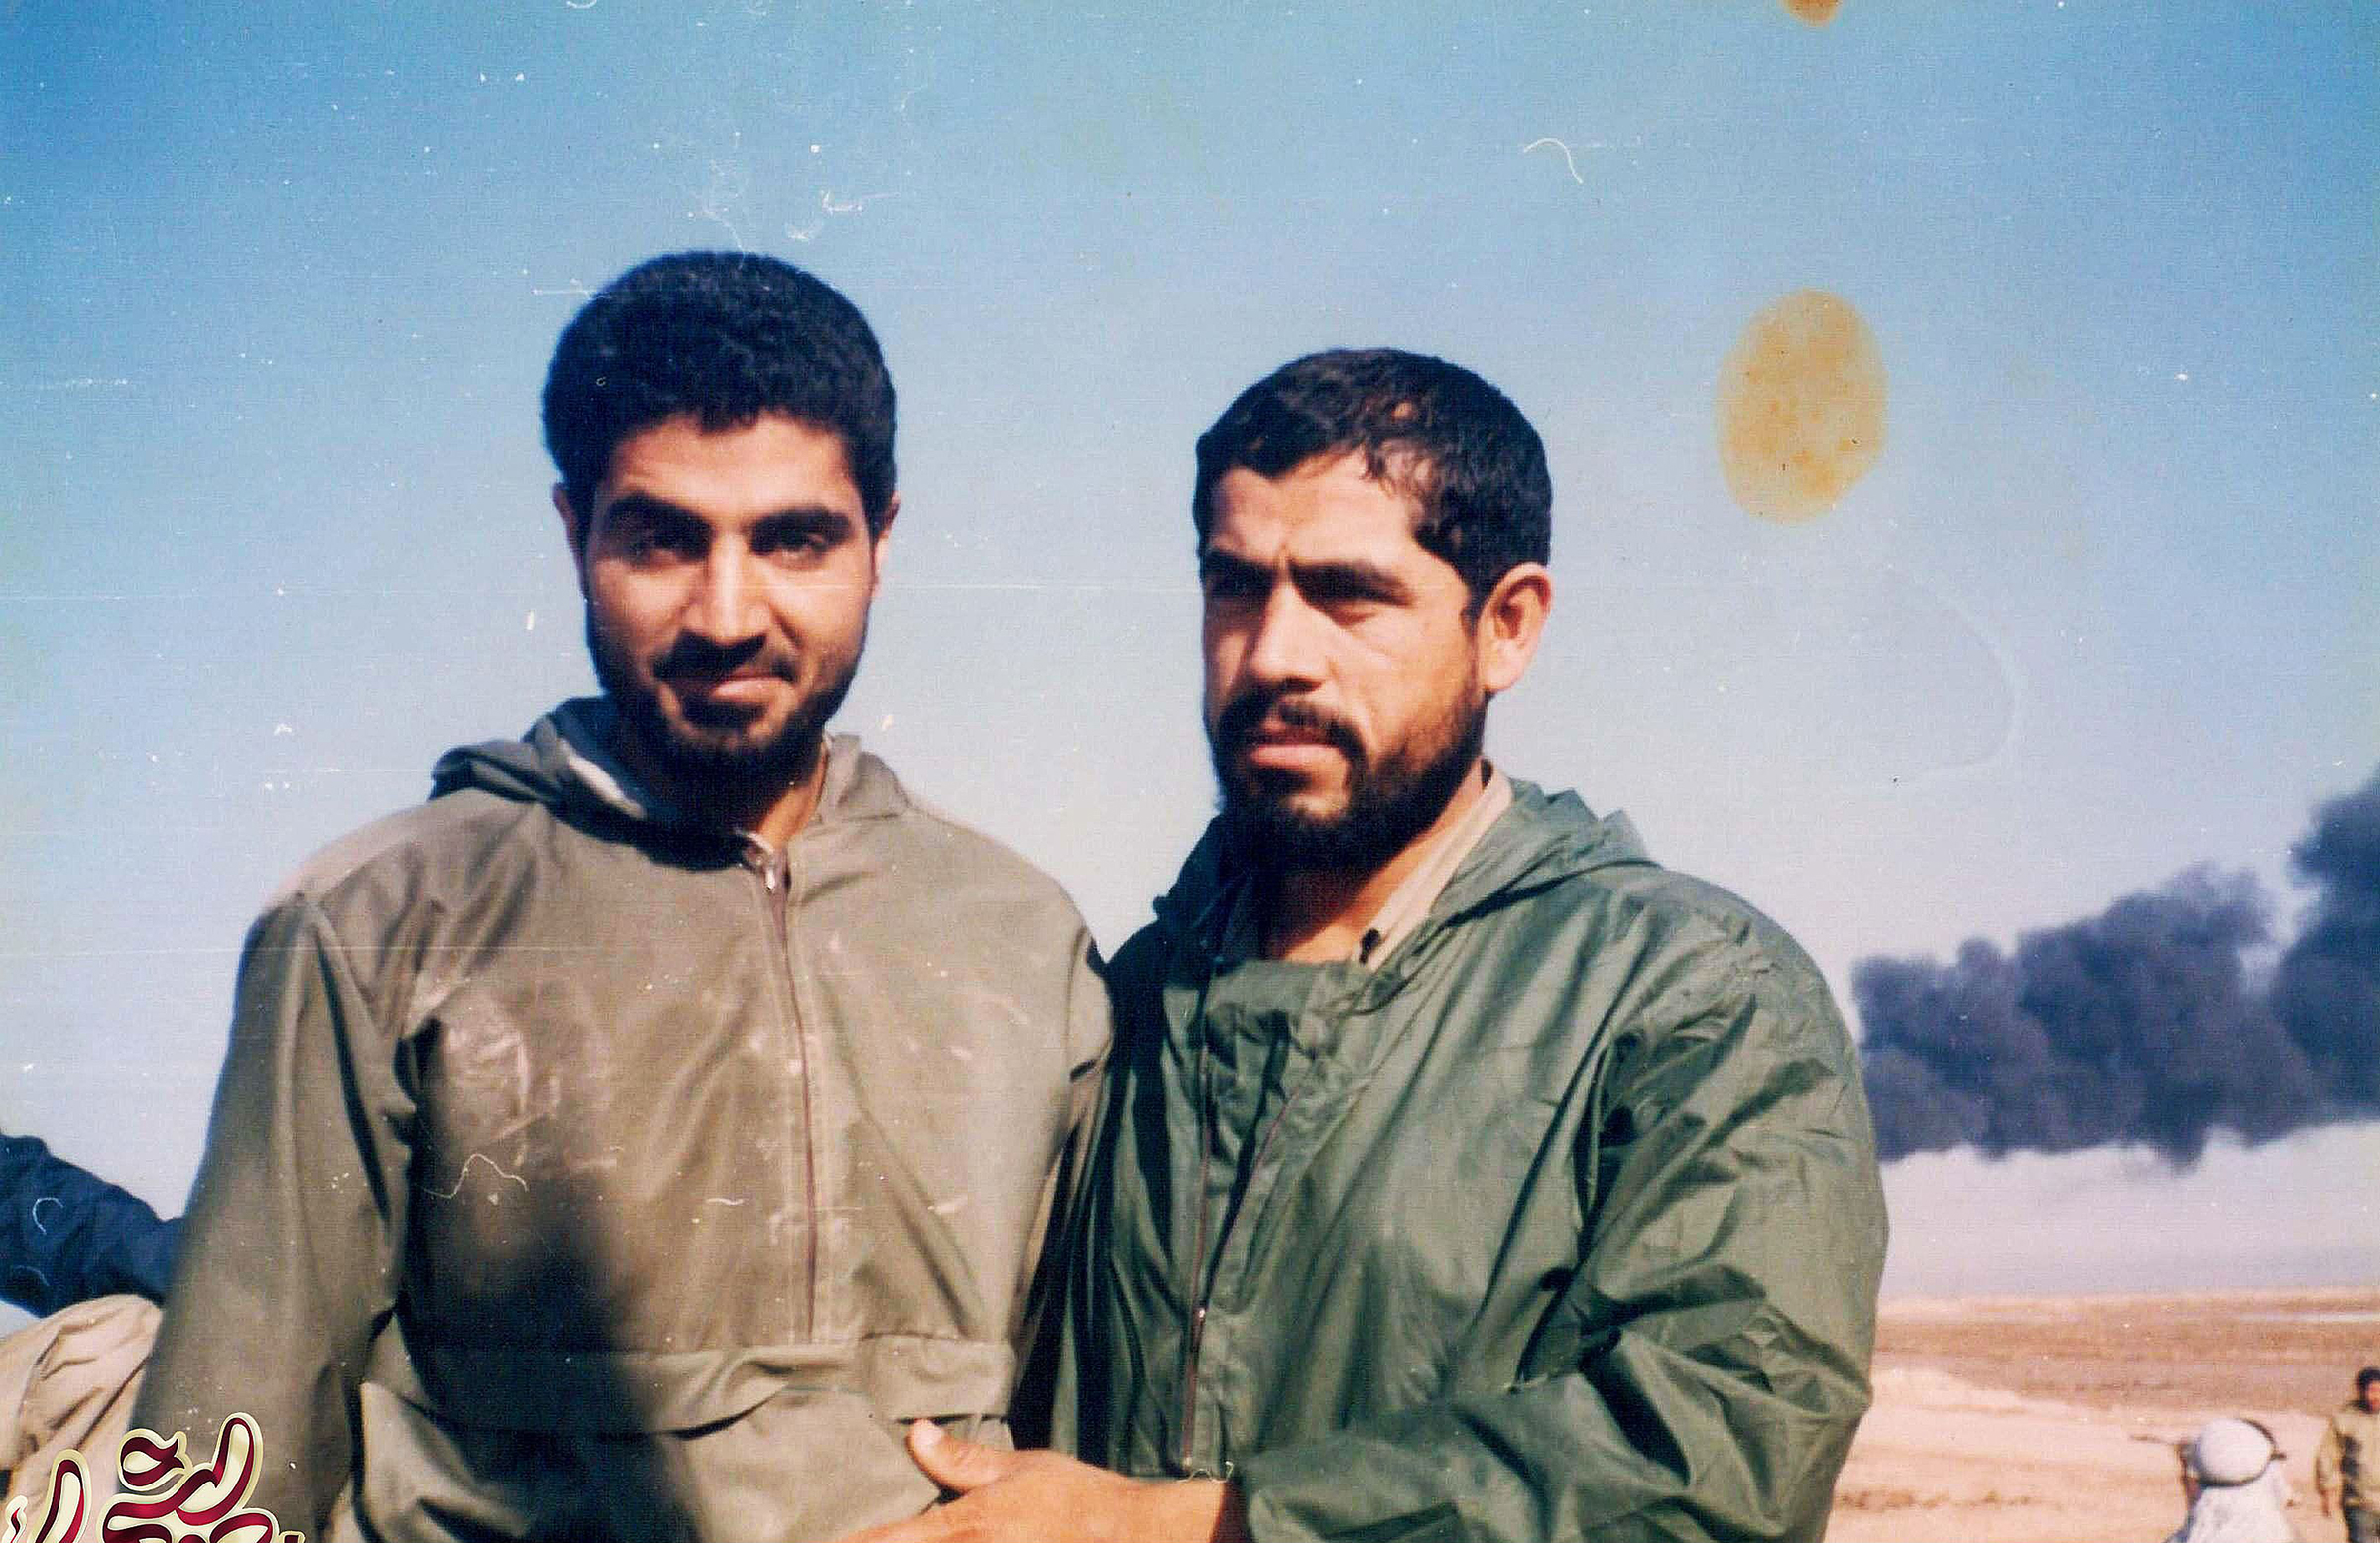 Qasem Soleimani during the Iran-Iraq war in the early 1980s. (Ay-Collection/Sipa/AP)